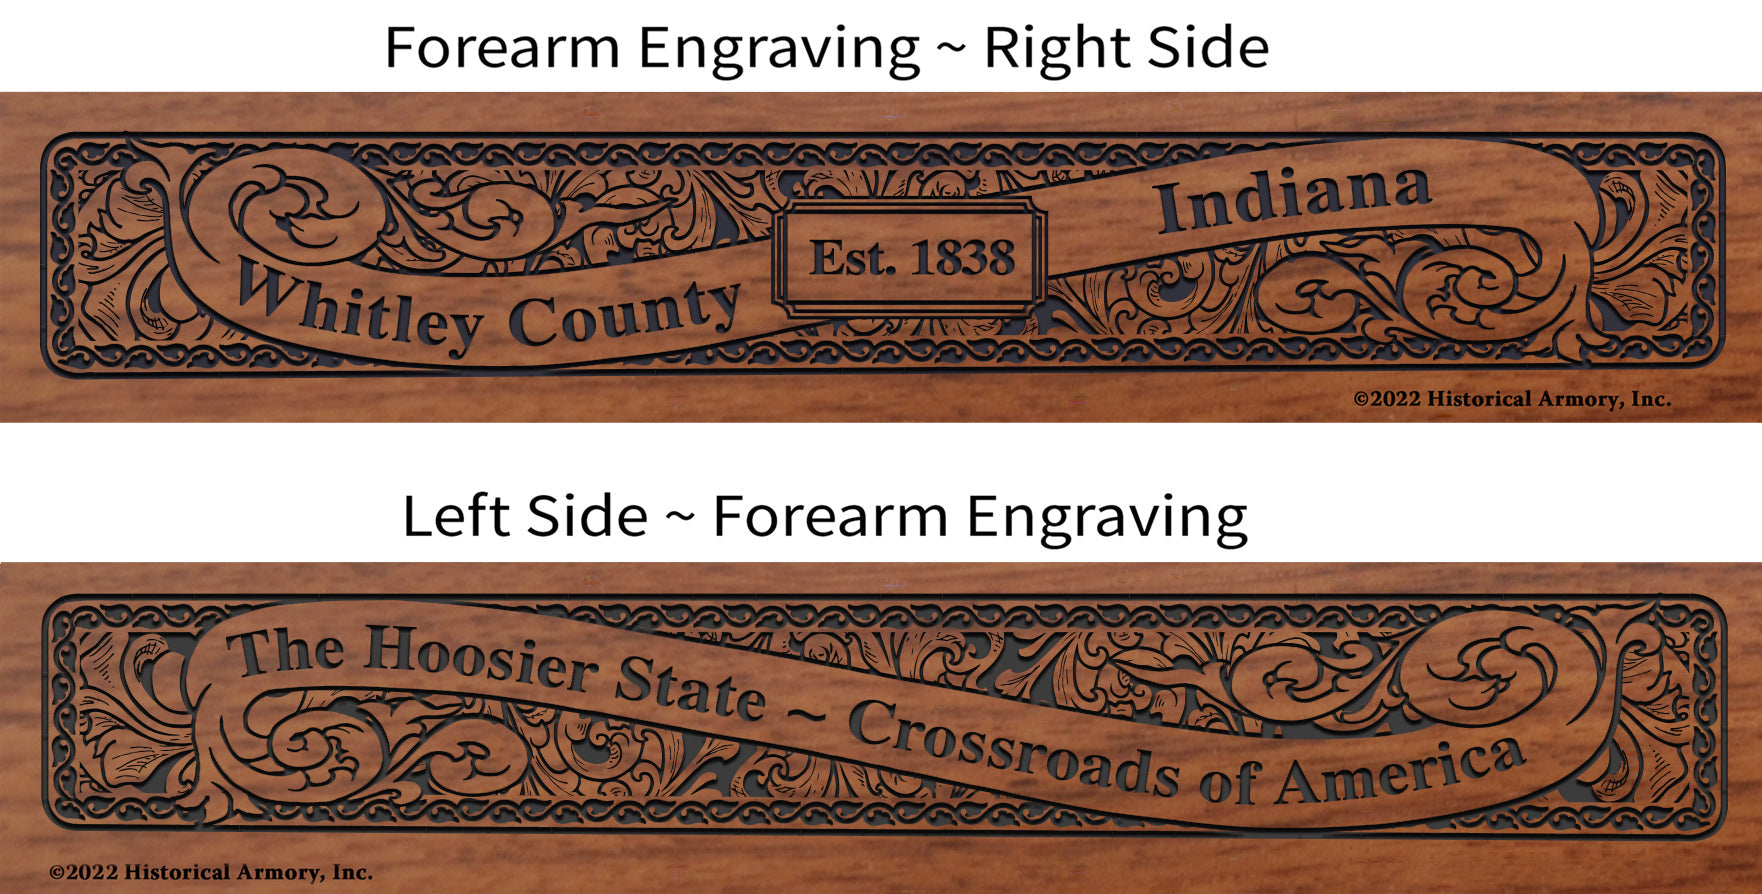 Whitley County Indiana Engraved Rifle Forearm